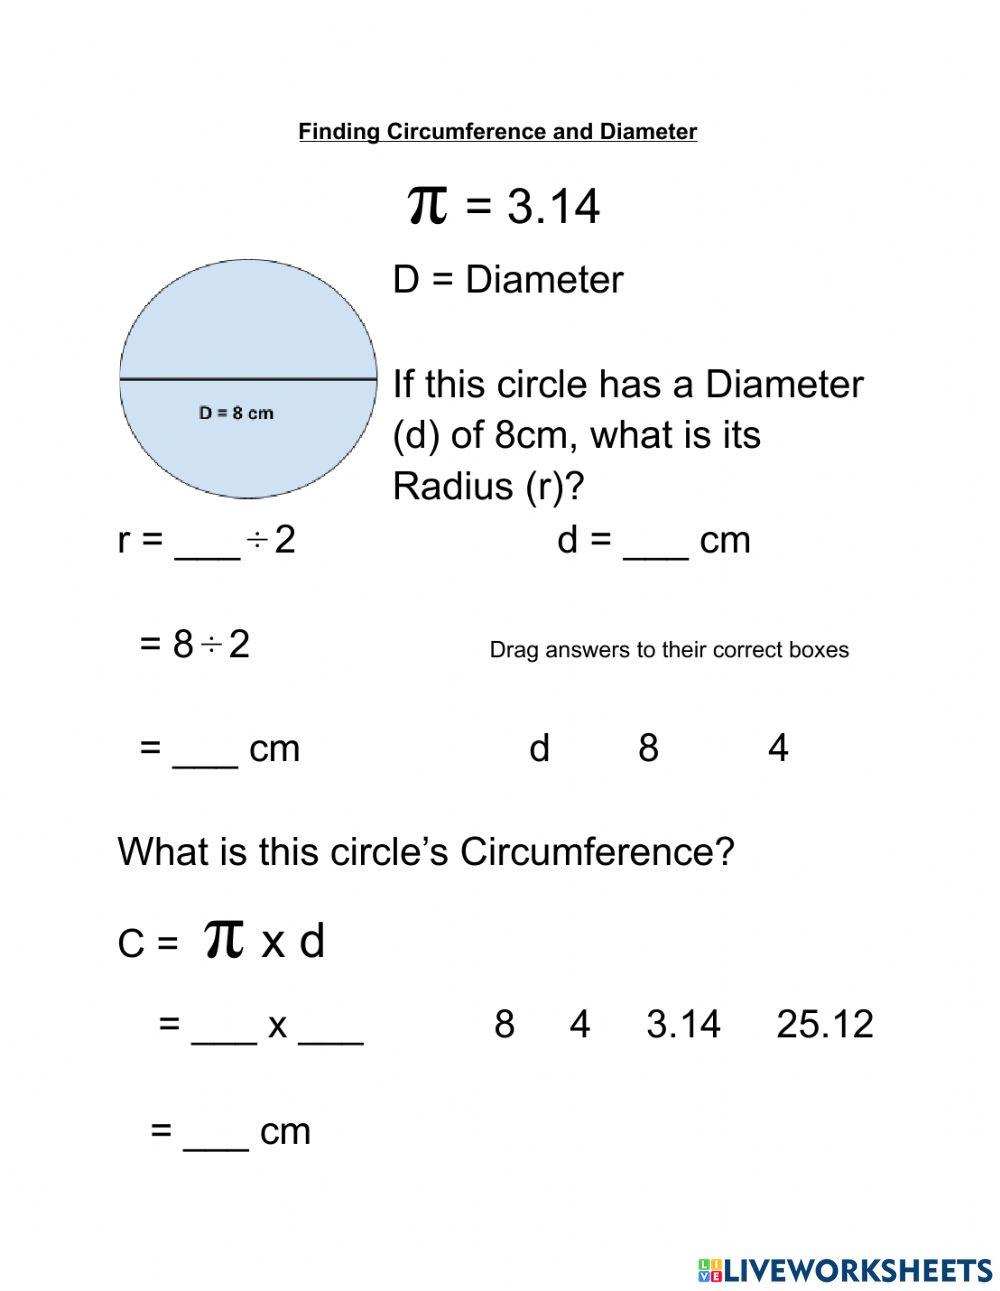 Finding Circumference and Diameter